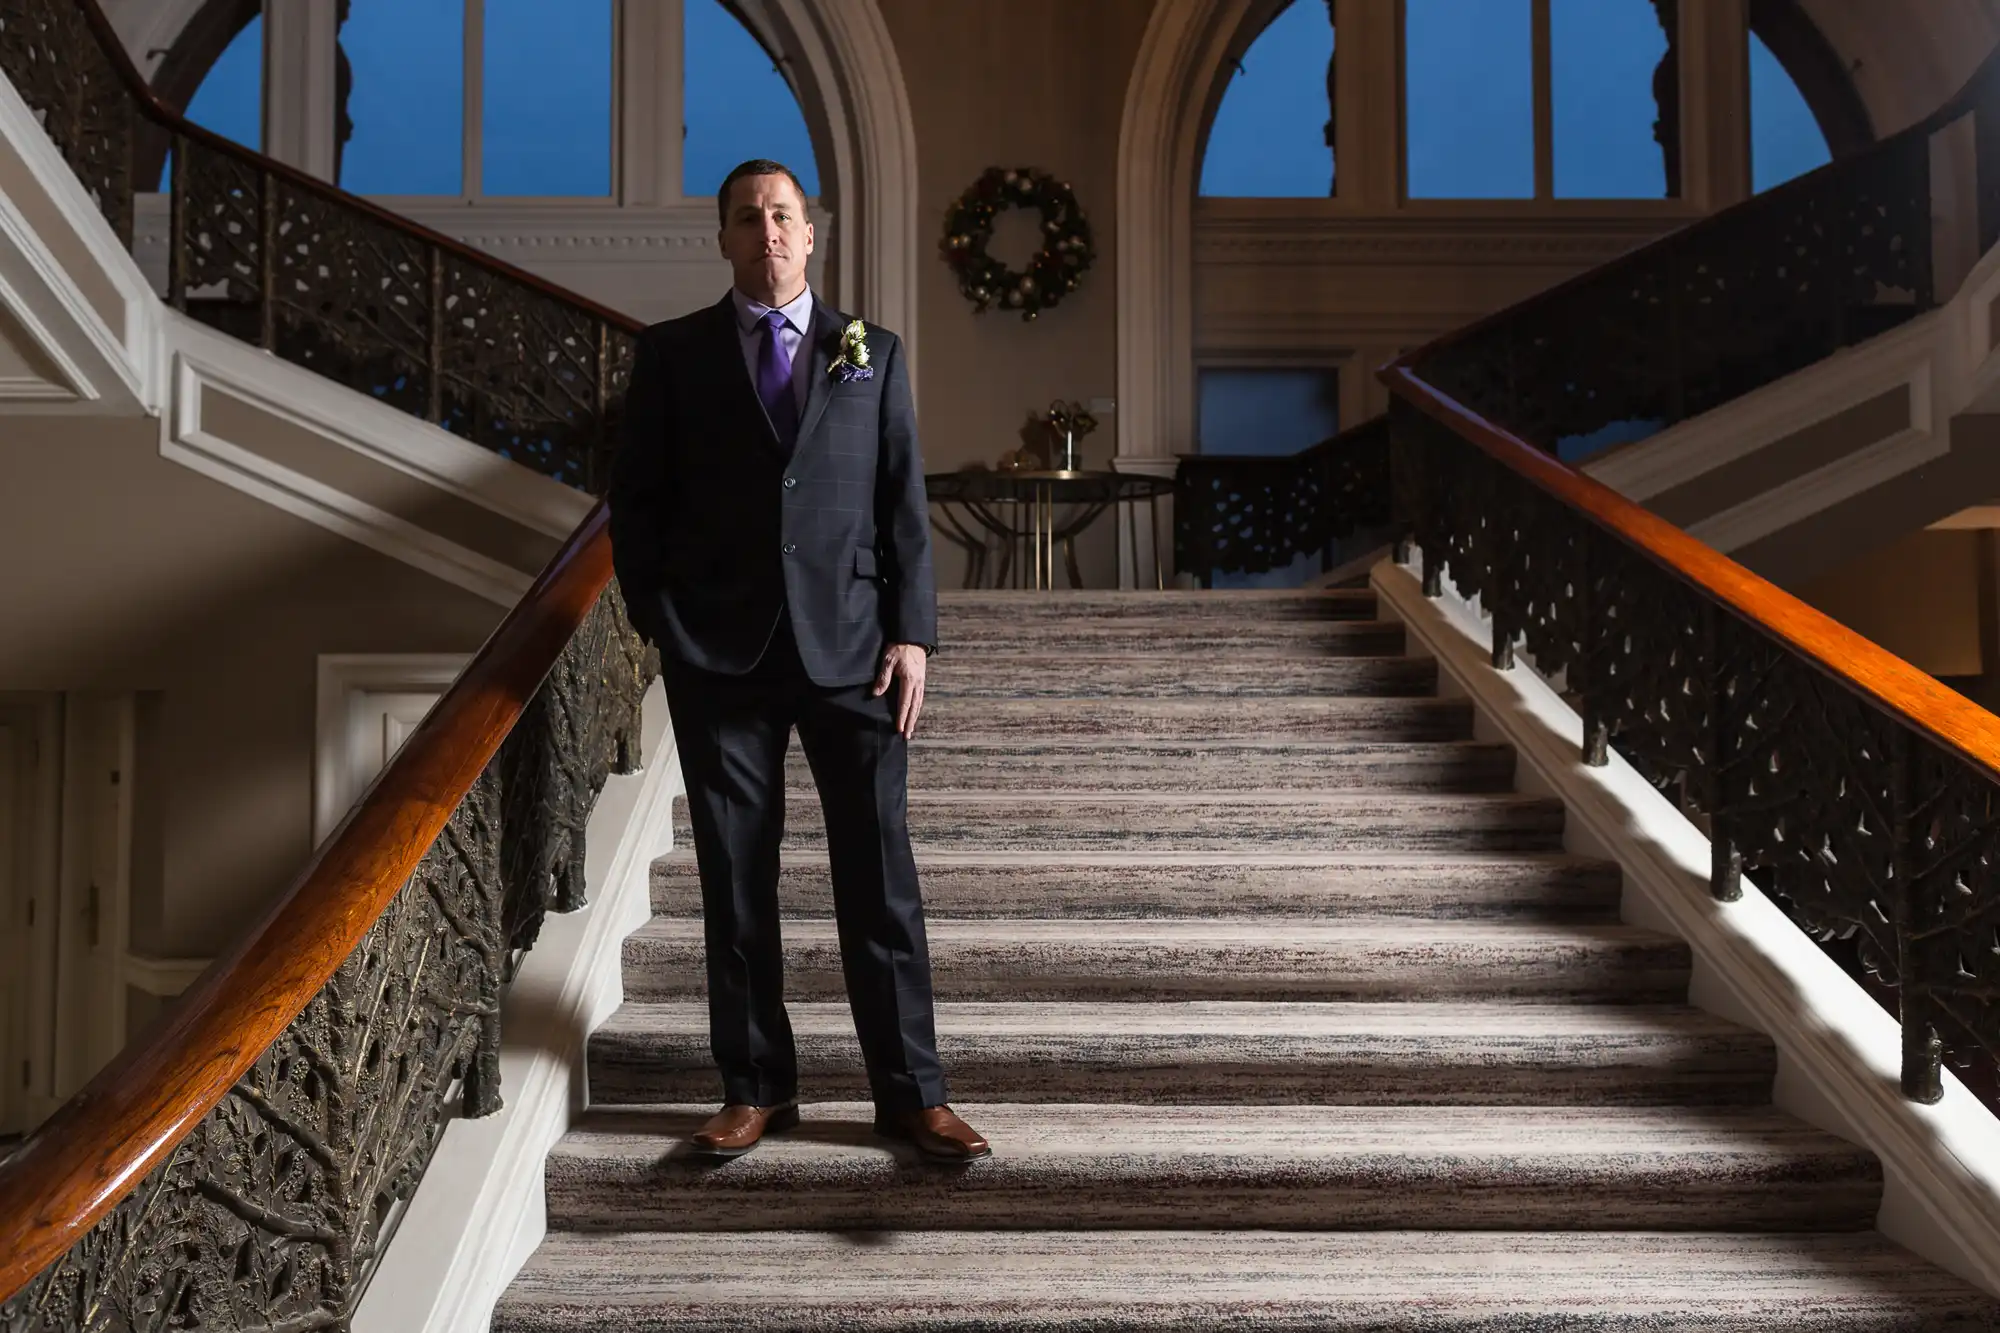 Man in a dark suit standing on a grand staircase with ornate railings inside an elegant building.